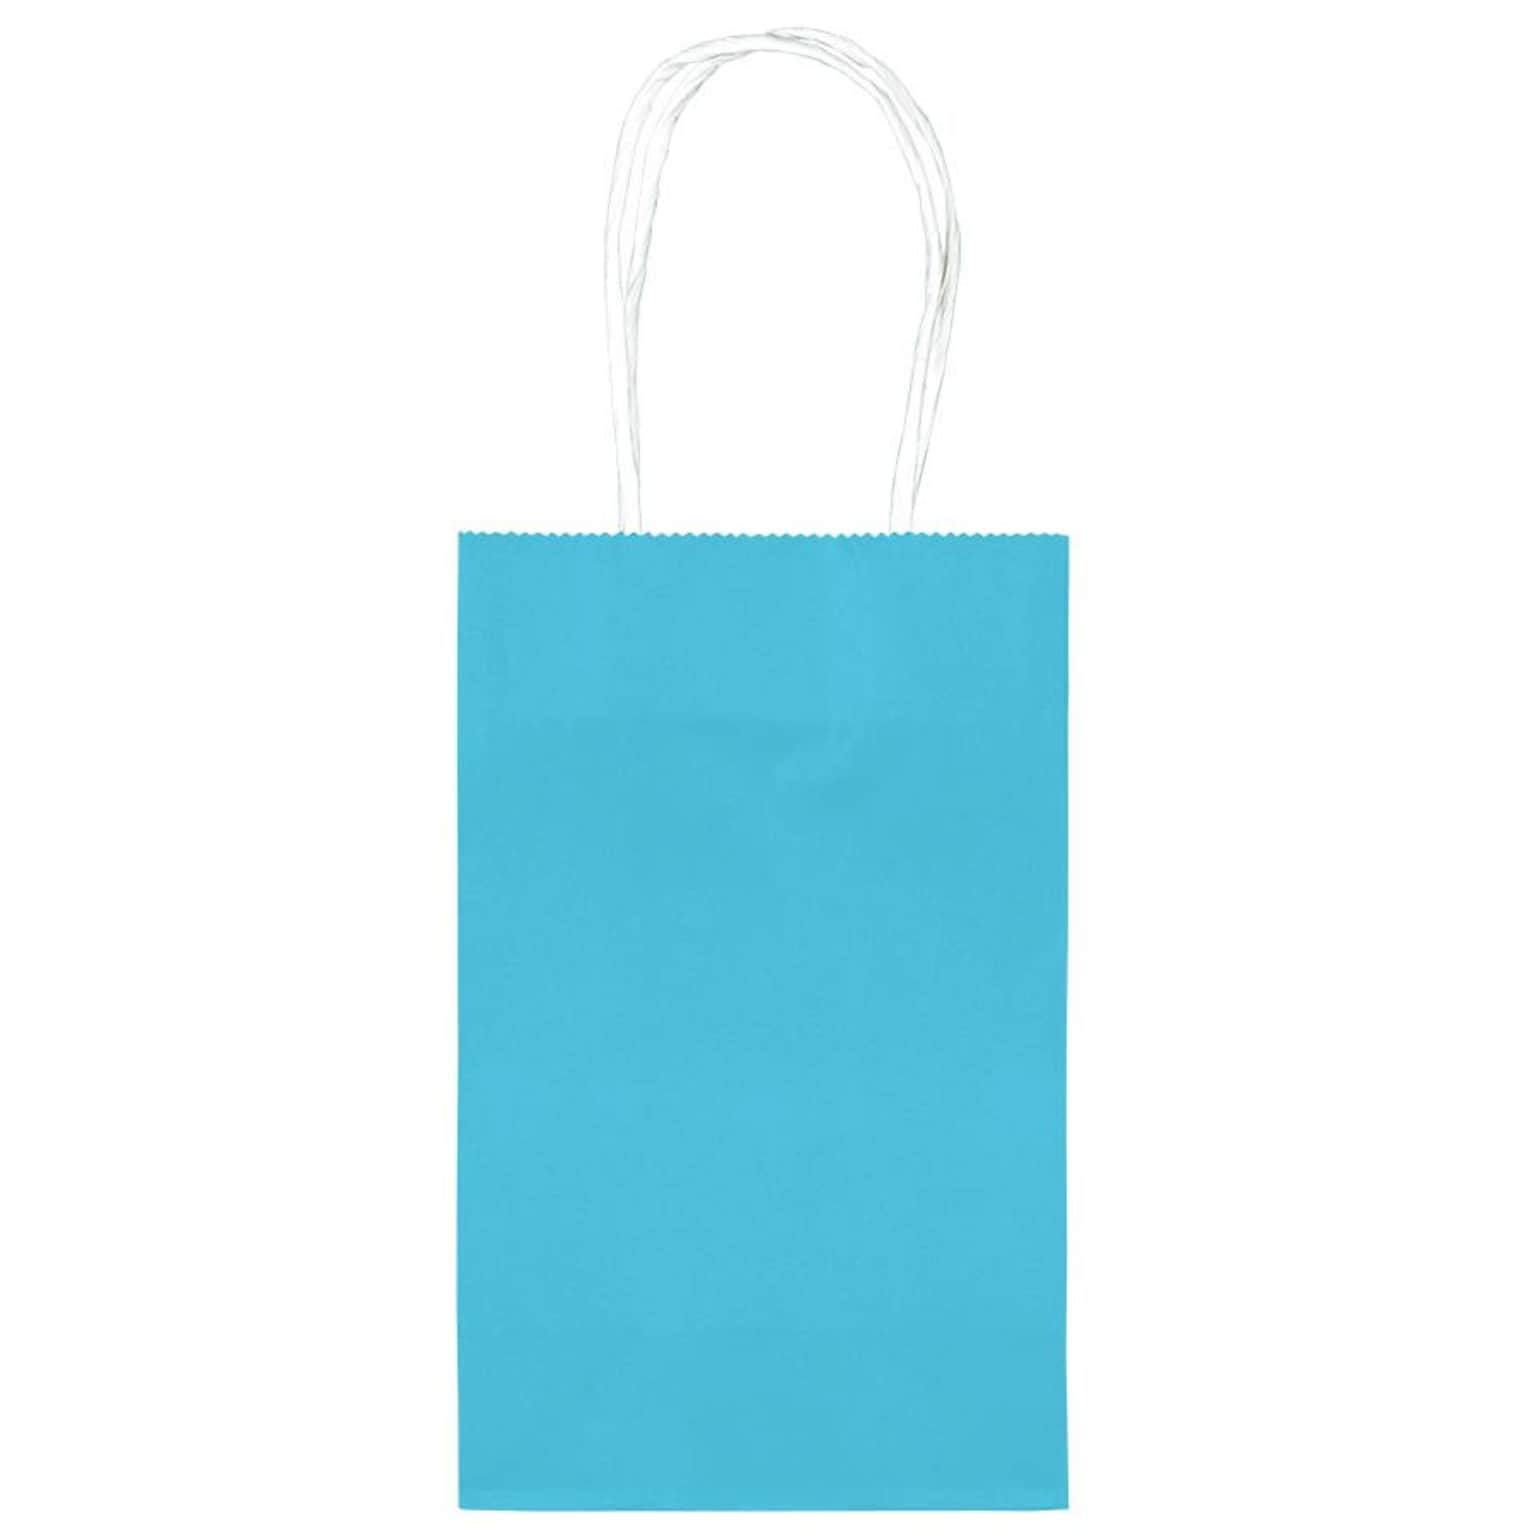 Amscan Cub Bags Value Pack, Turquoise, 4/Pack (162500.54)